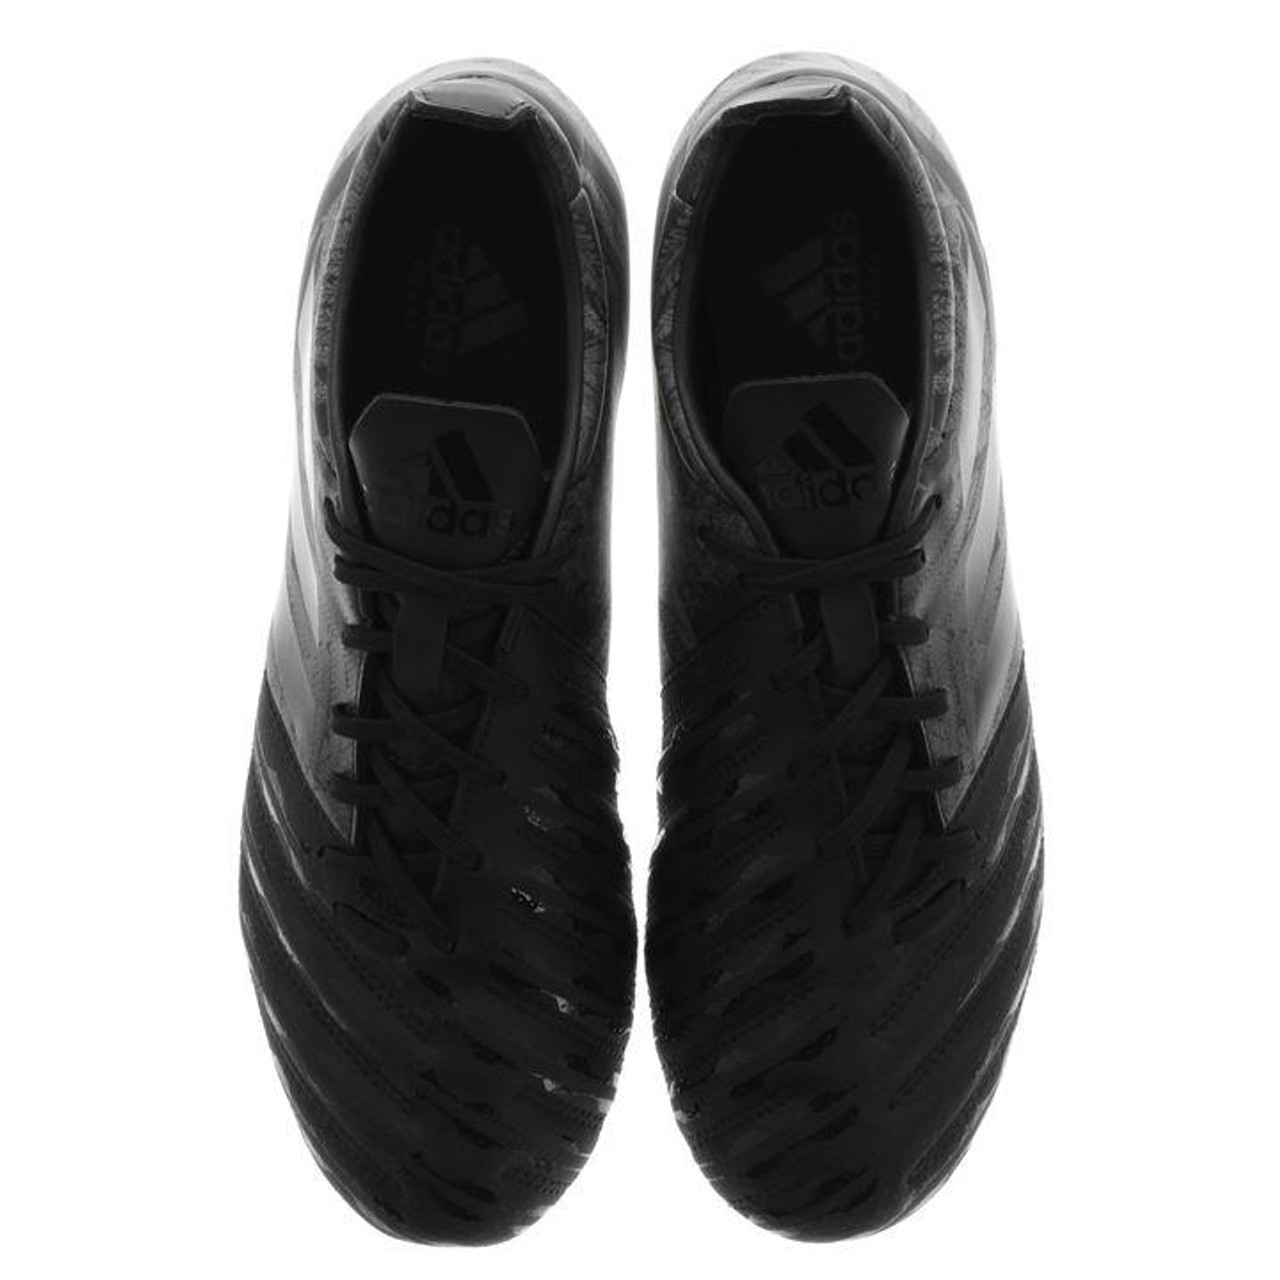 Malice SG All Blacks Rugby Boots - Black/Orange on sale at City 79.99